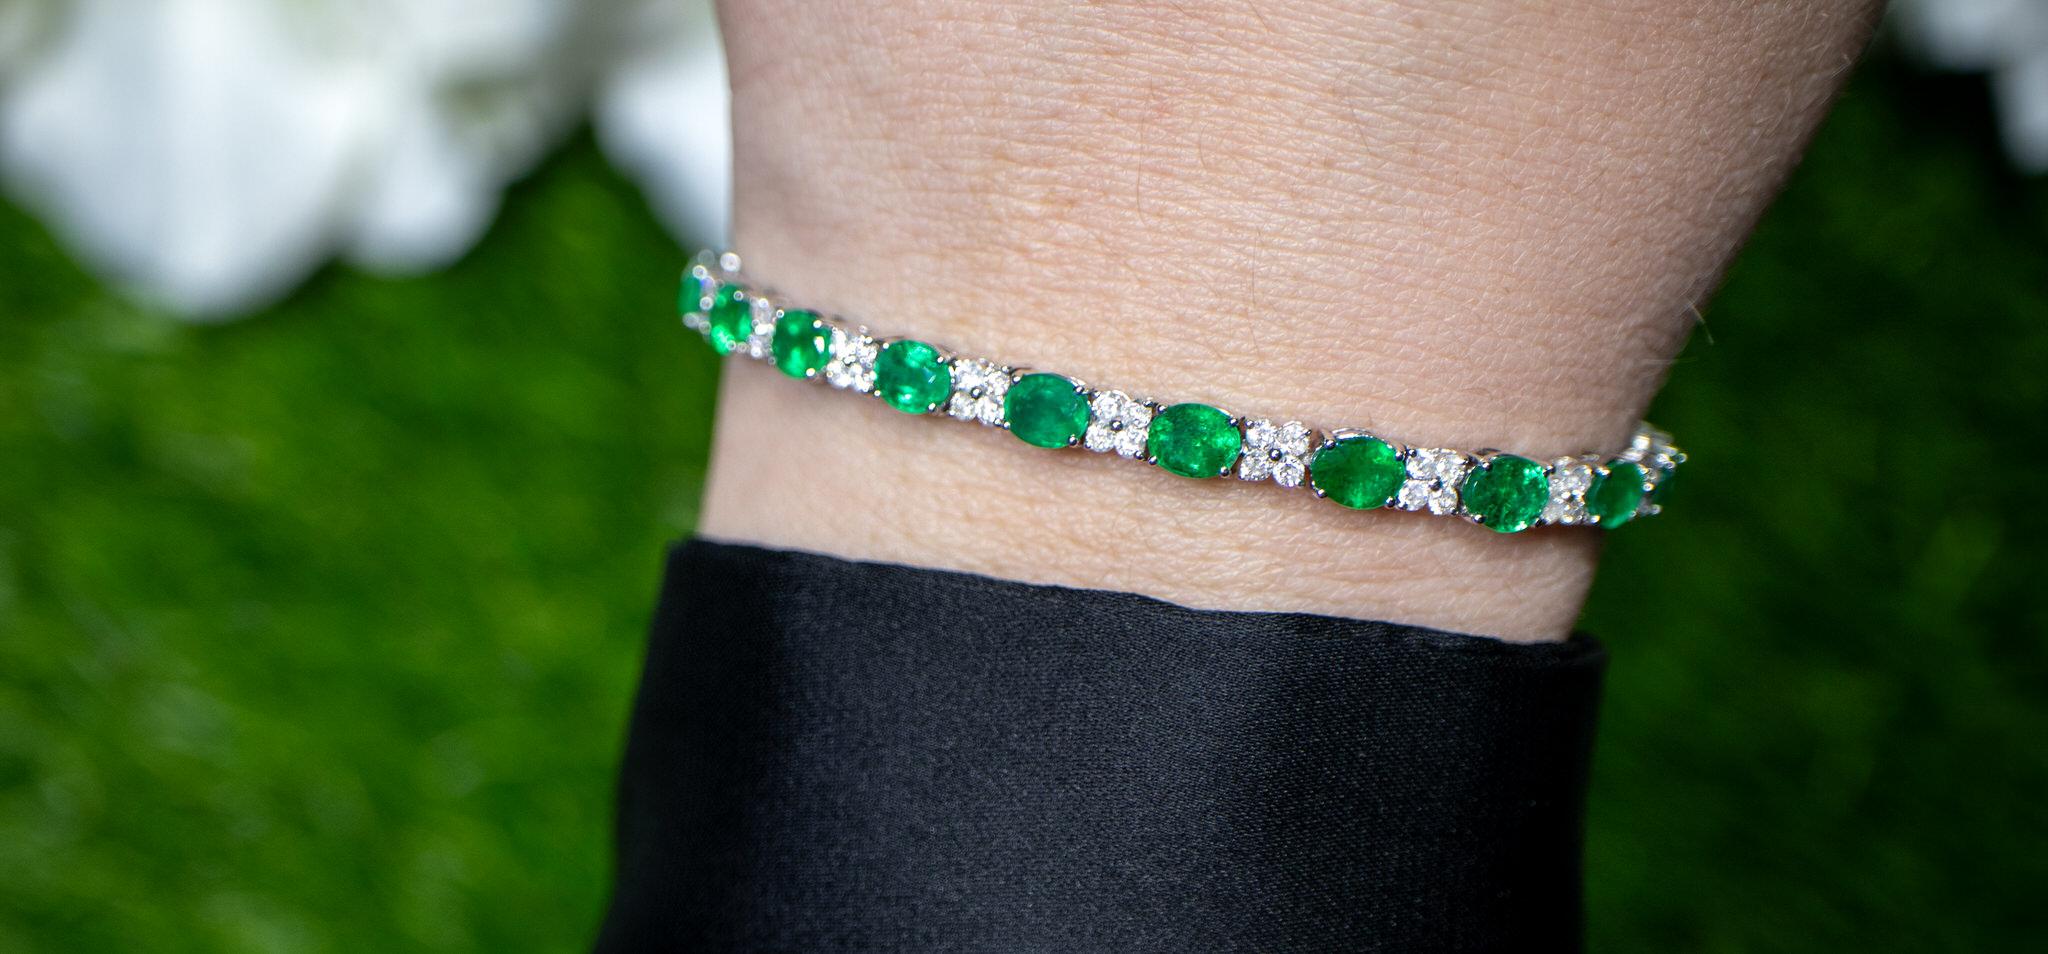 Emerald Bracelet Diamond Links 8.5 Carats 18K White Gold In Excellent Condition For Sale In Laguna Niguel, CA